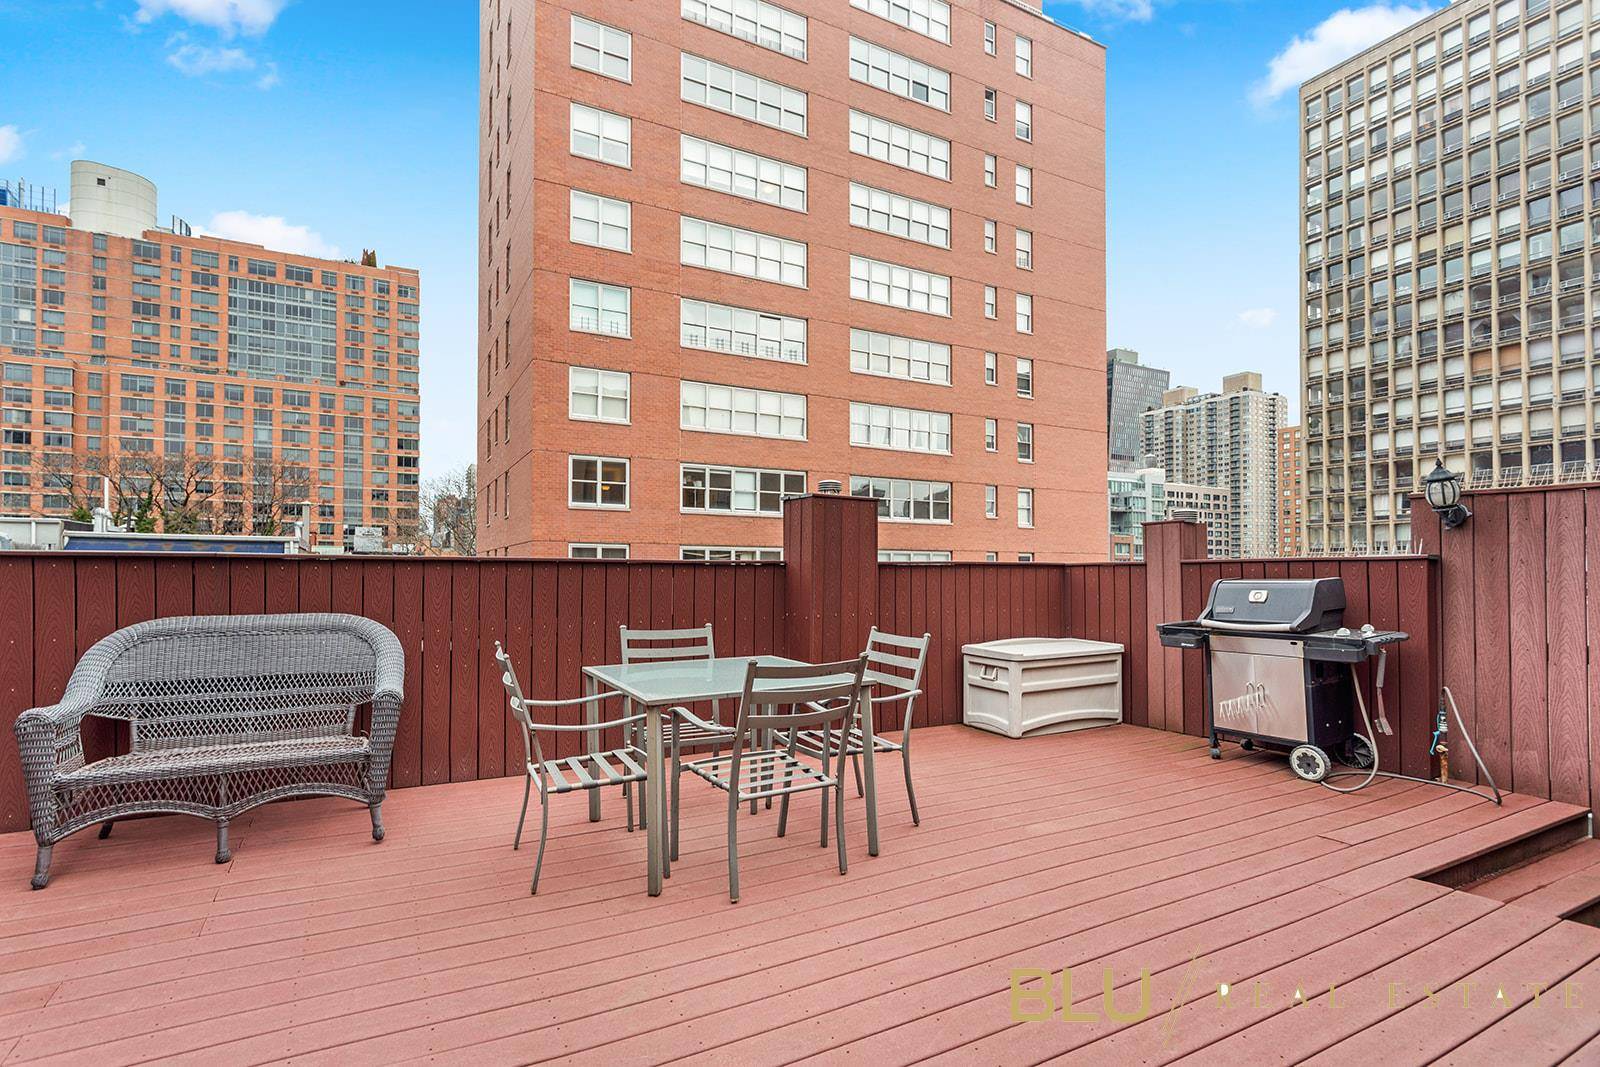 Come home to this one of a kind duplex residence with a private roof deck.